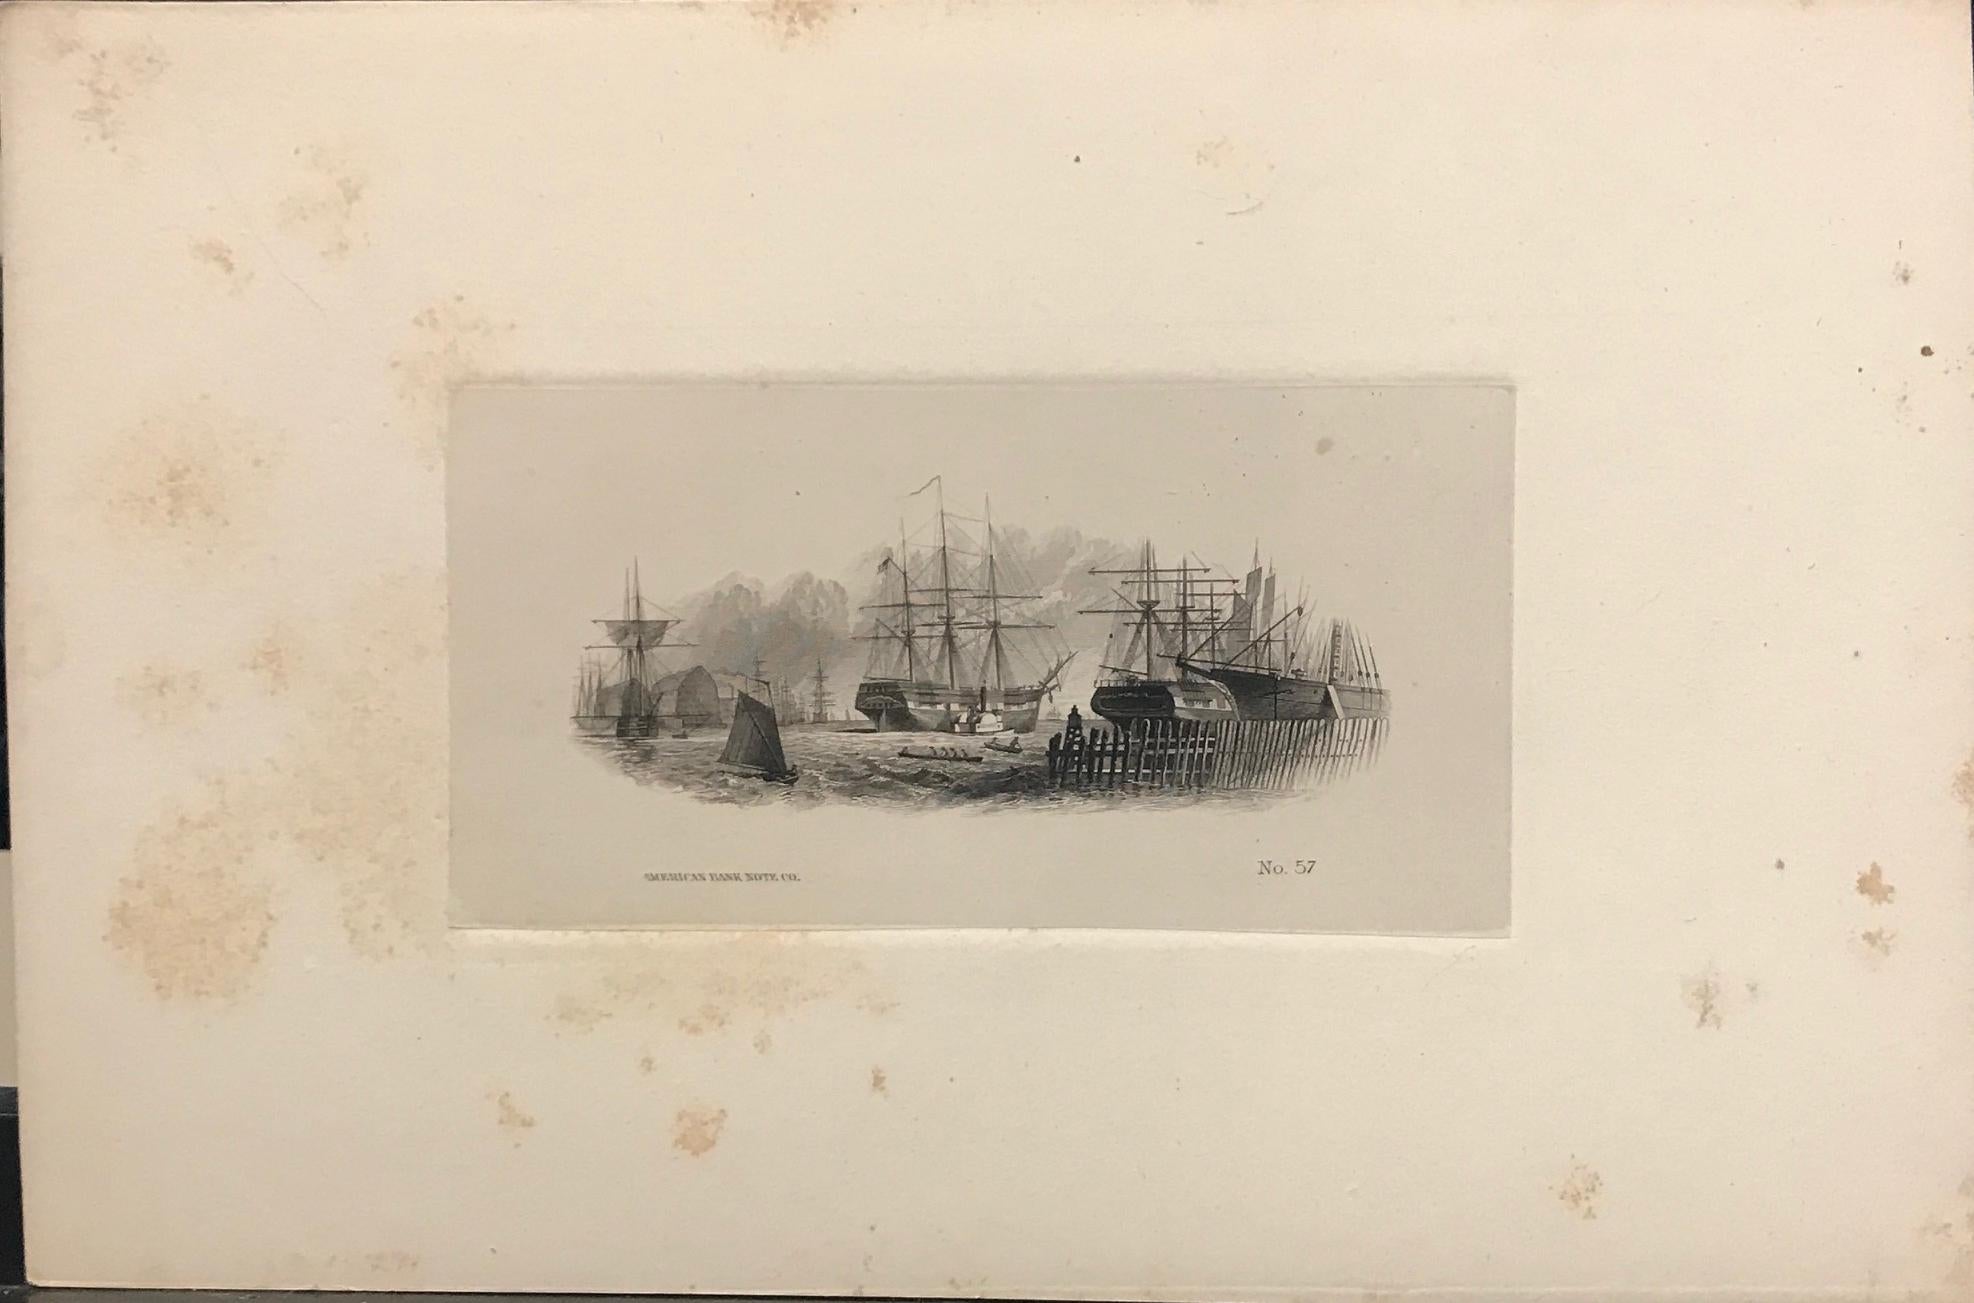 Harbour view with sailing ships, American Bank Note Co., #57

Engraving on paper, circa 1870, cut out and glued on strong sunken paper ( stained, rubbed and tained by age), ready to be framed in. The person who did this put a lot effort in this